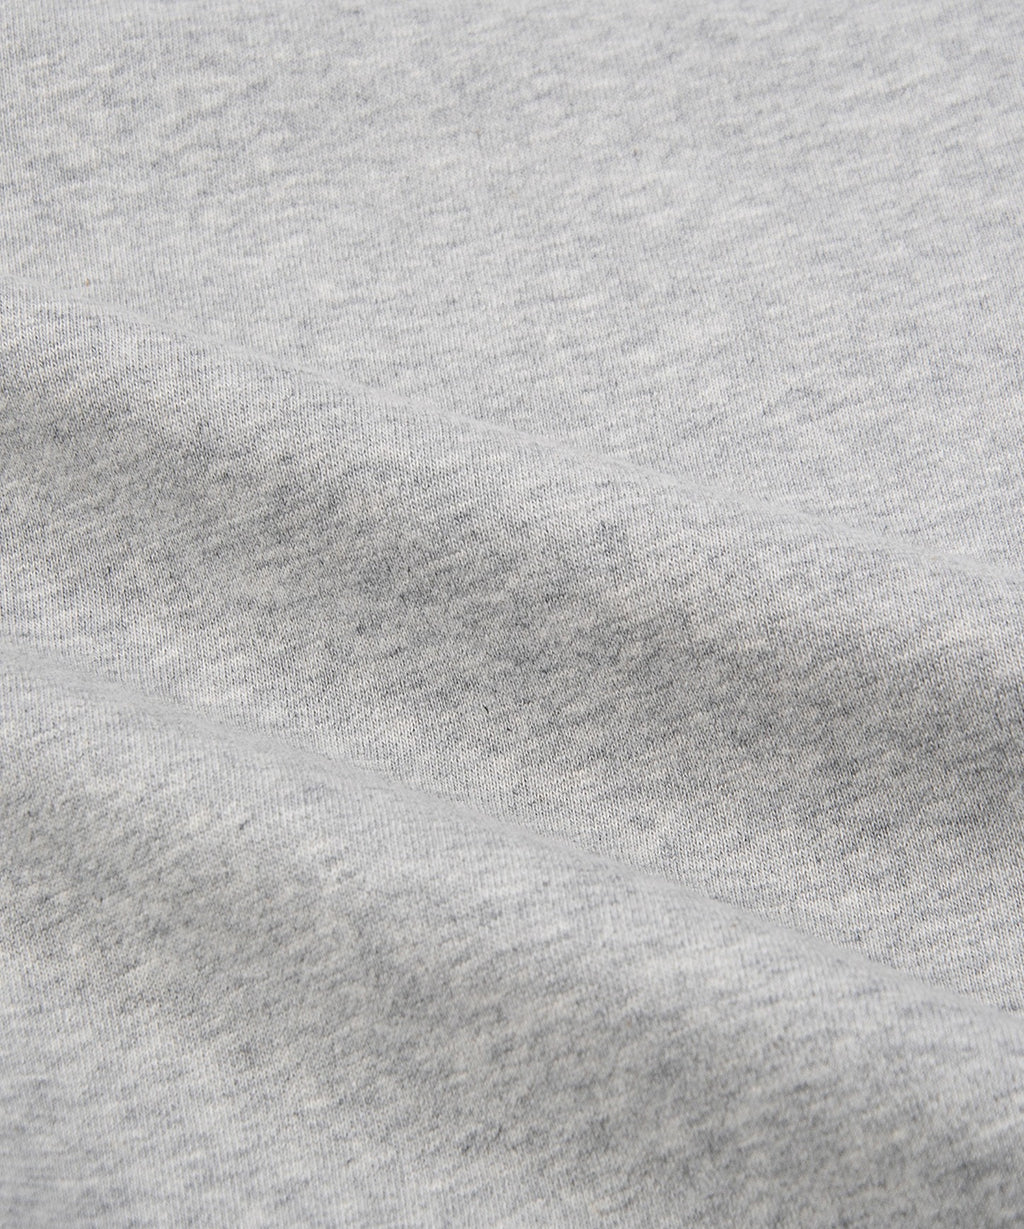  Fabric closeup on Paper Planes Crest Hoodie, color Heather Grey.